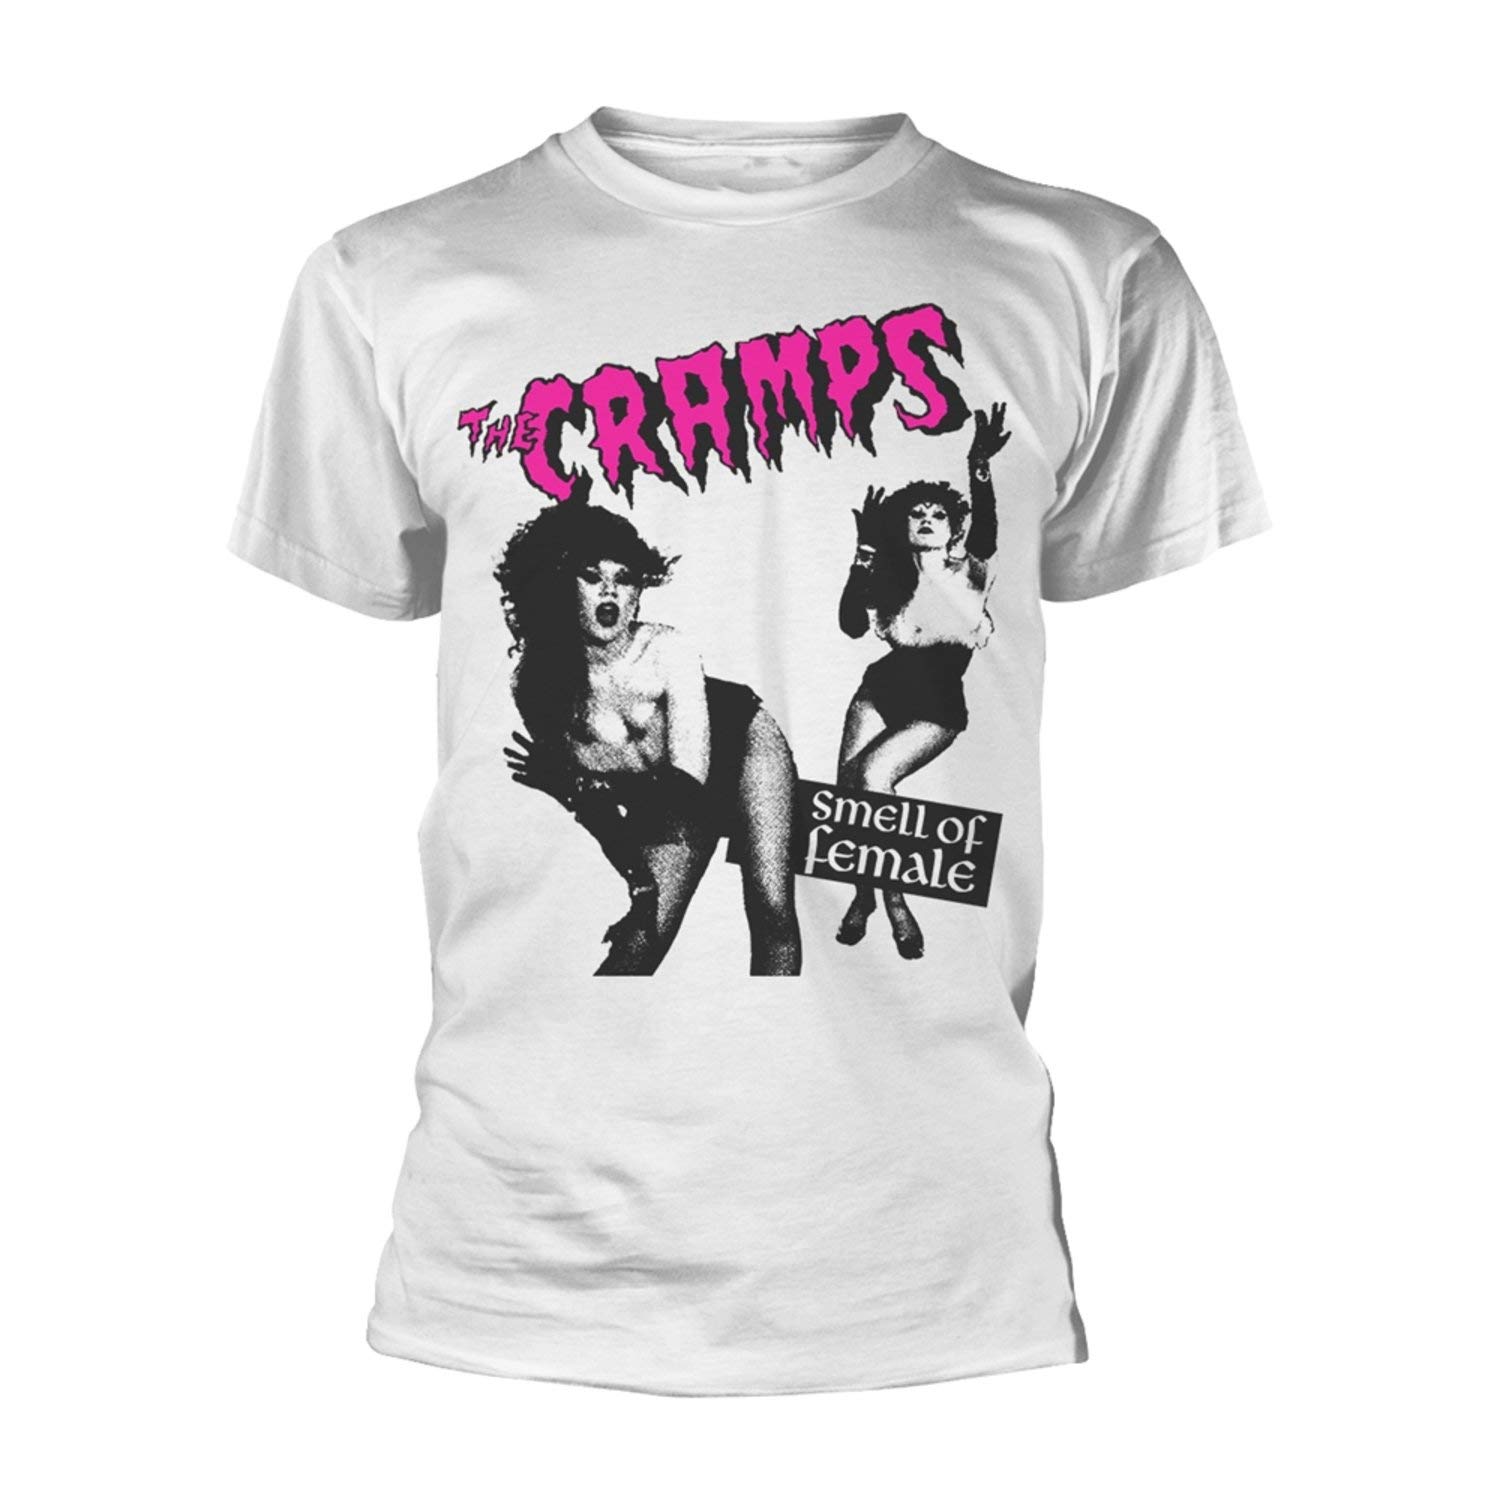 CRAMPS, THE Smell of Female T-Shirt XXL